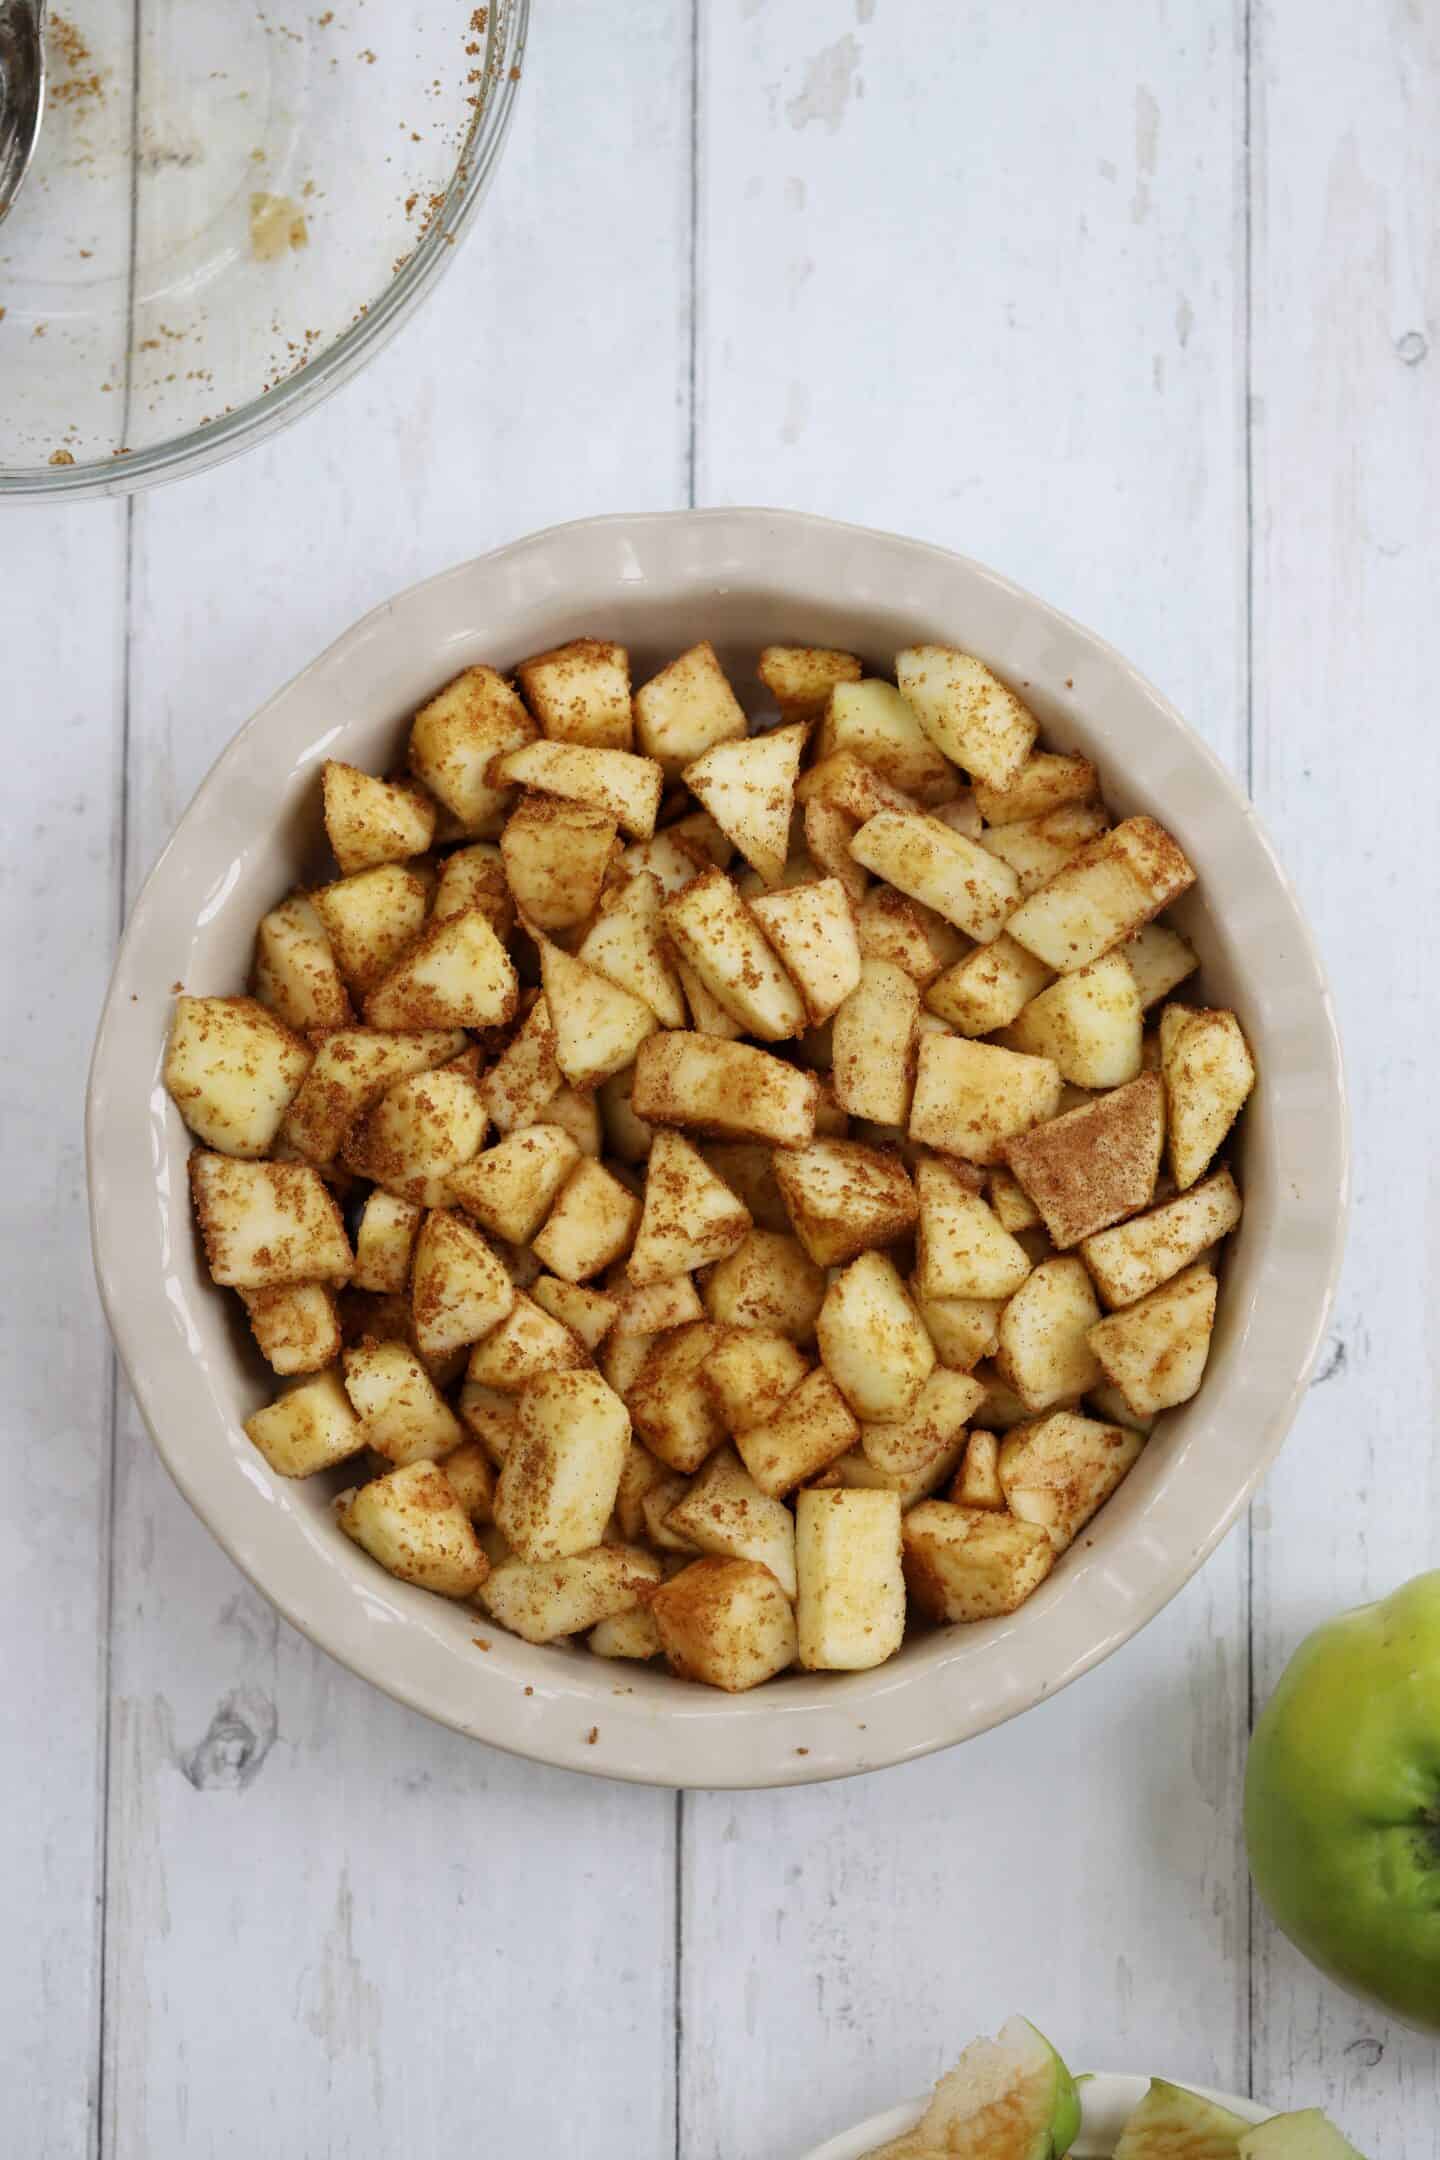 Apples with sugar and cinnamon in a crumble dish.